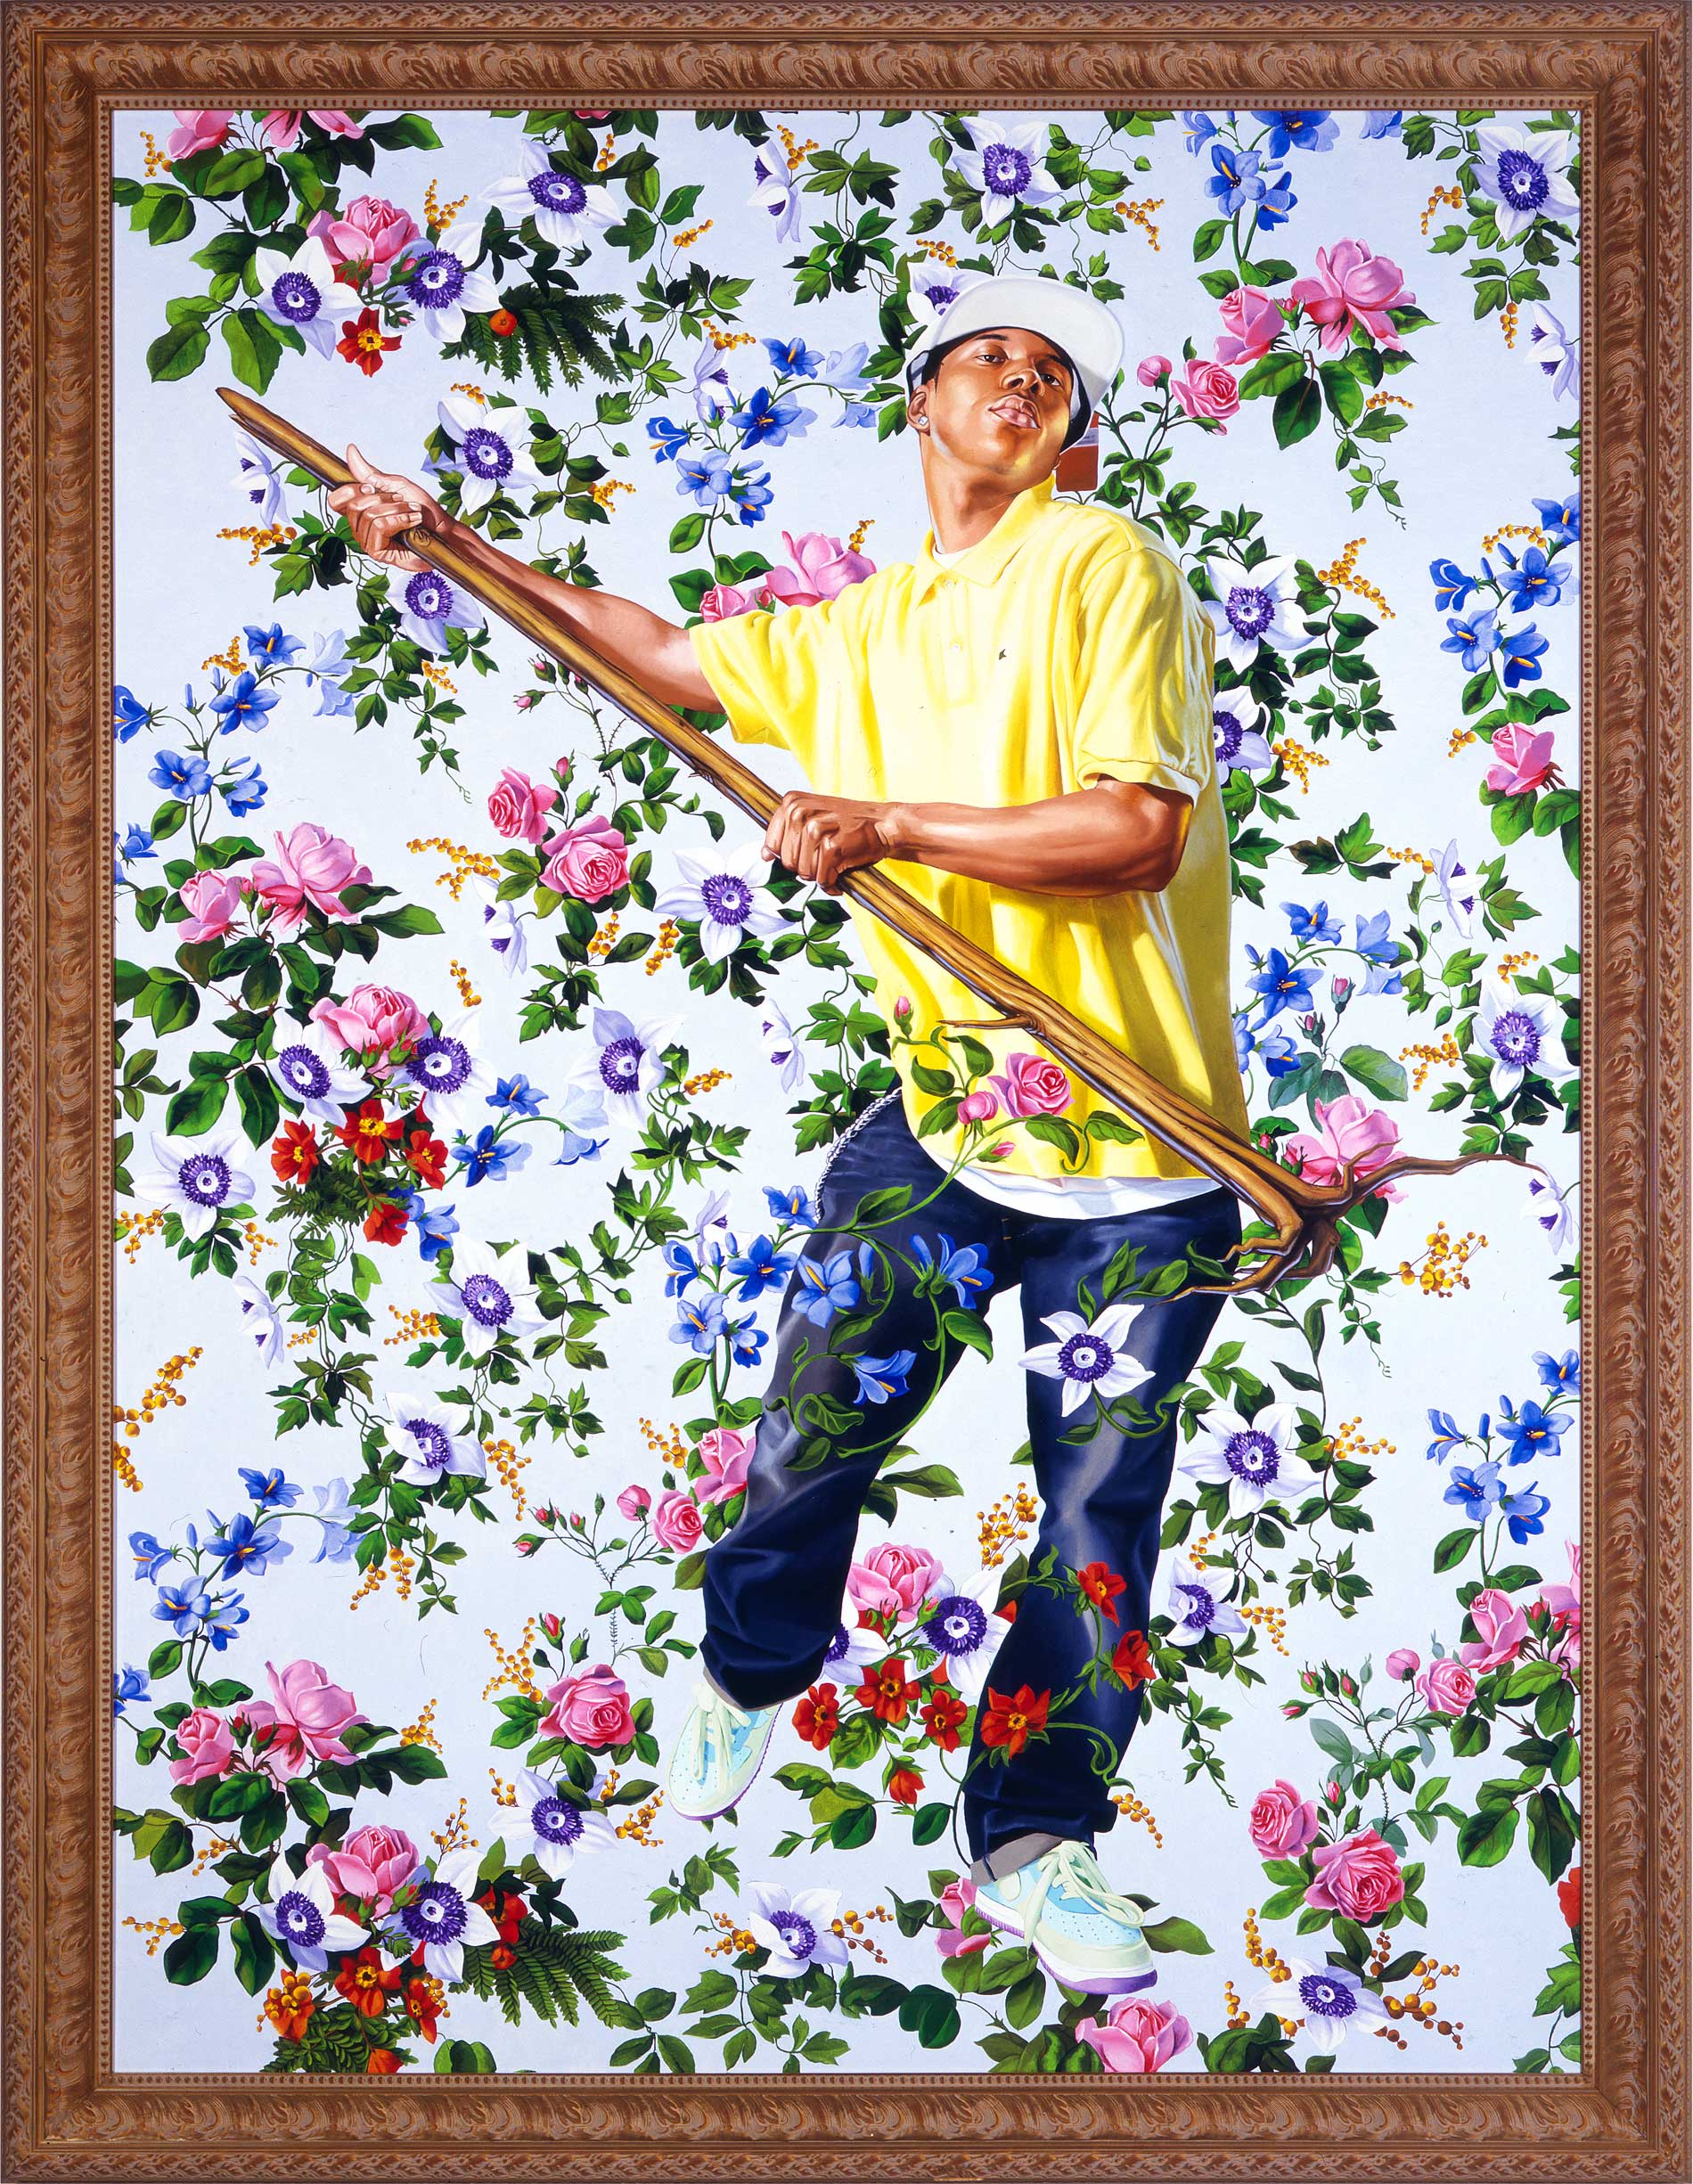 Kehinde Wiley | Scenic | 2